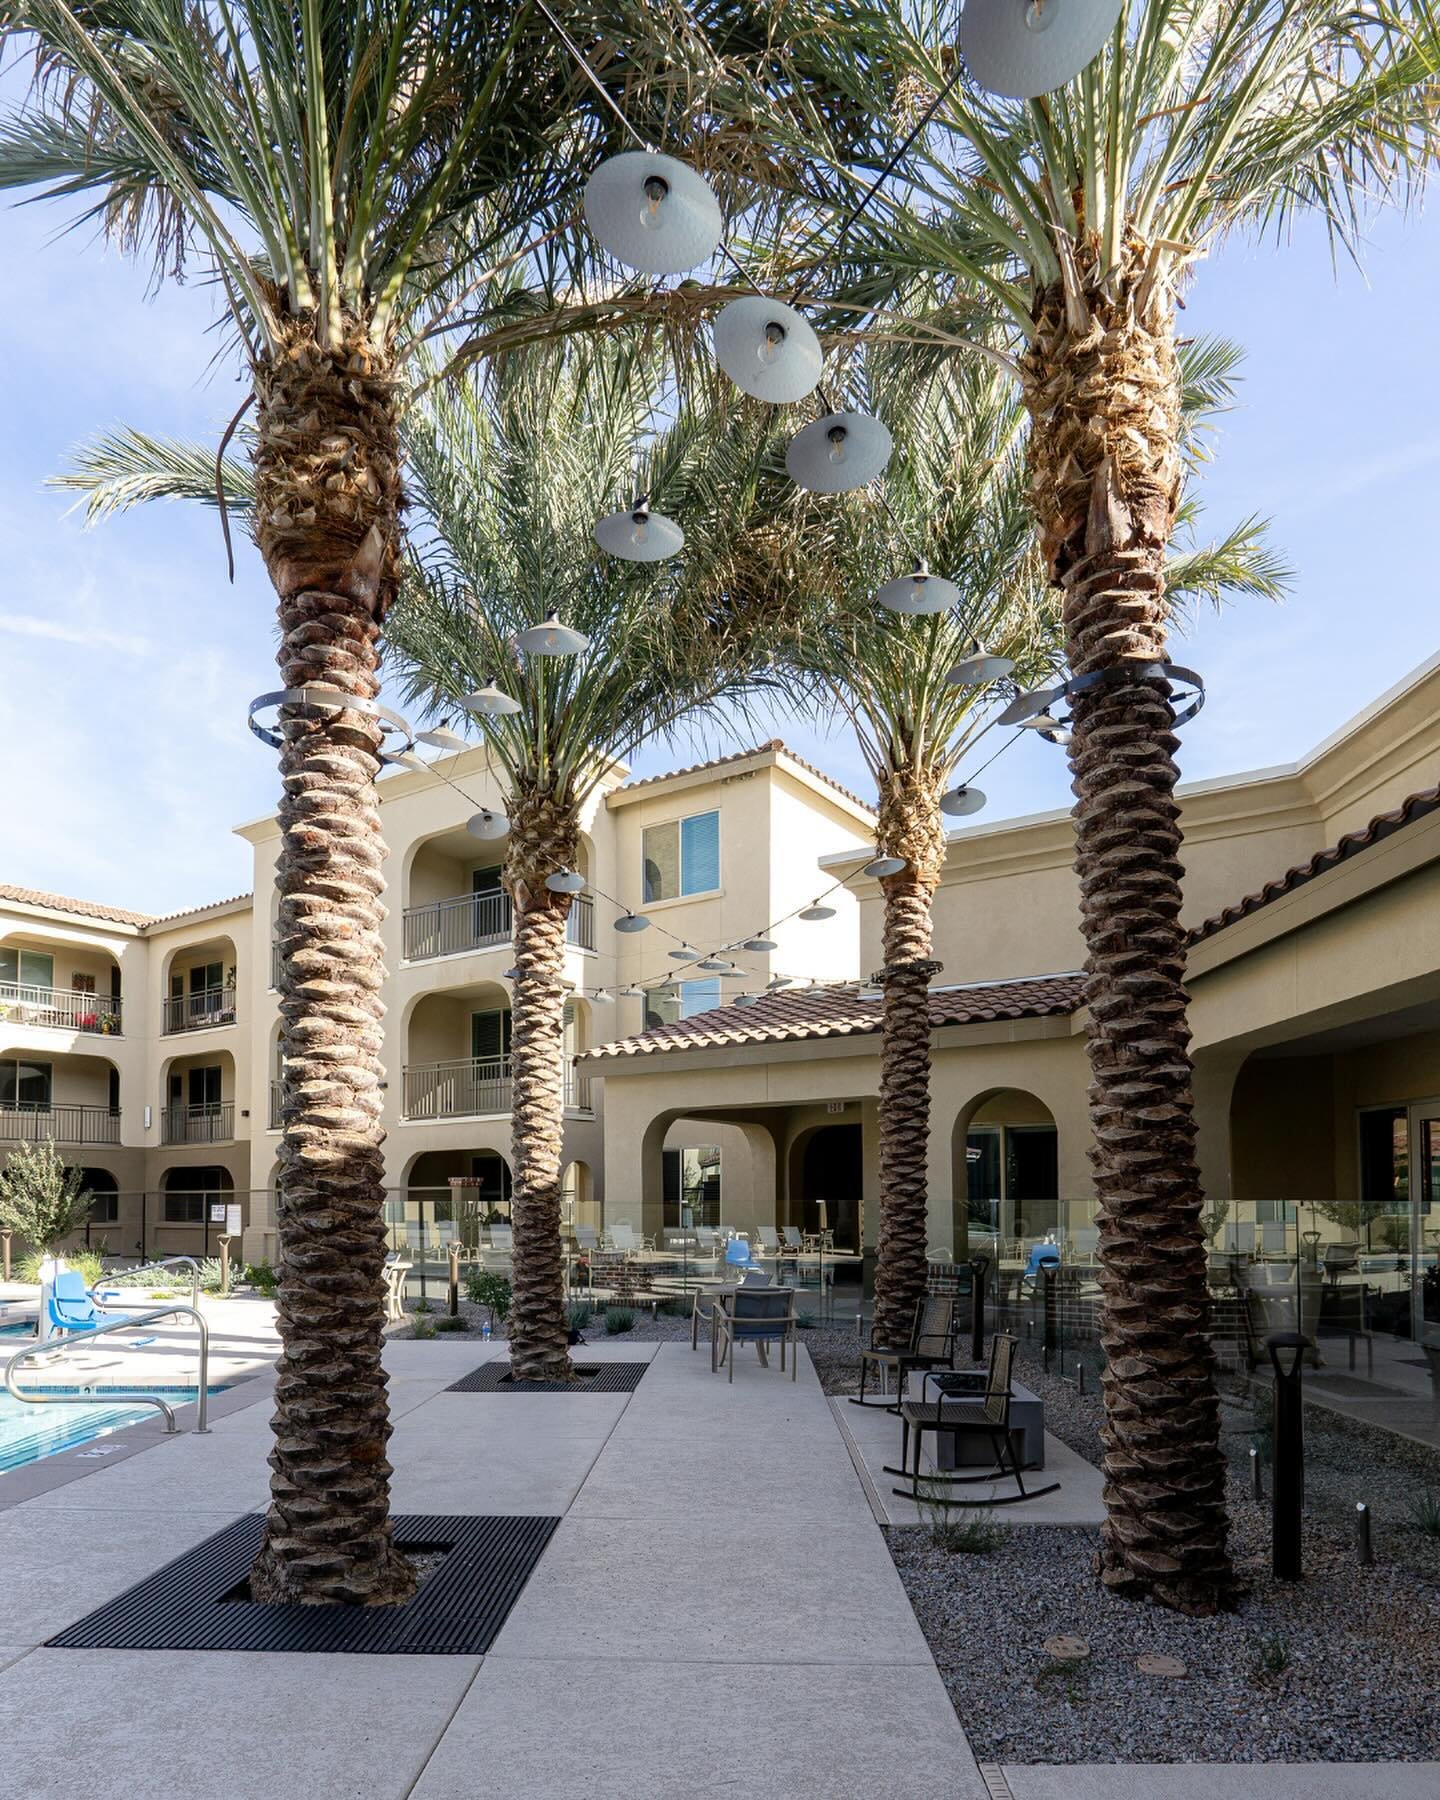 Exterior amenities that make your home feel like a resort! 🌴

Featured is Greystar Marana, a new construction active adult community in Tucson, AZ. The exterior amenities include a pool with cabanas, a built-in barbeque, and fire pits throughout. 

